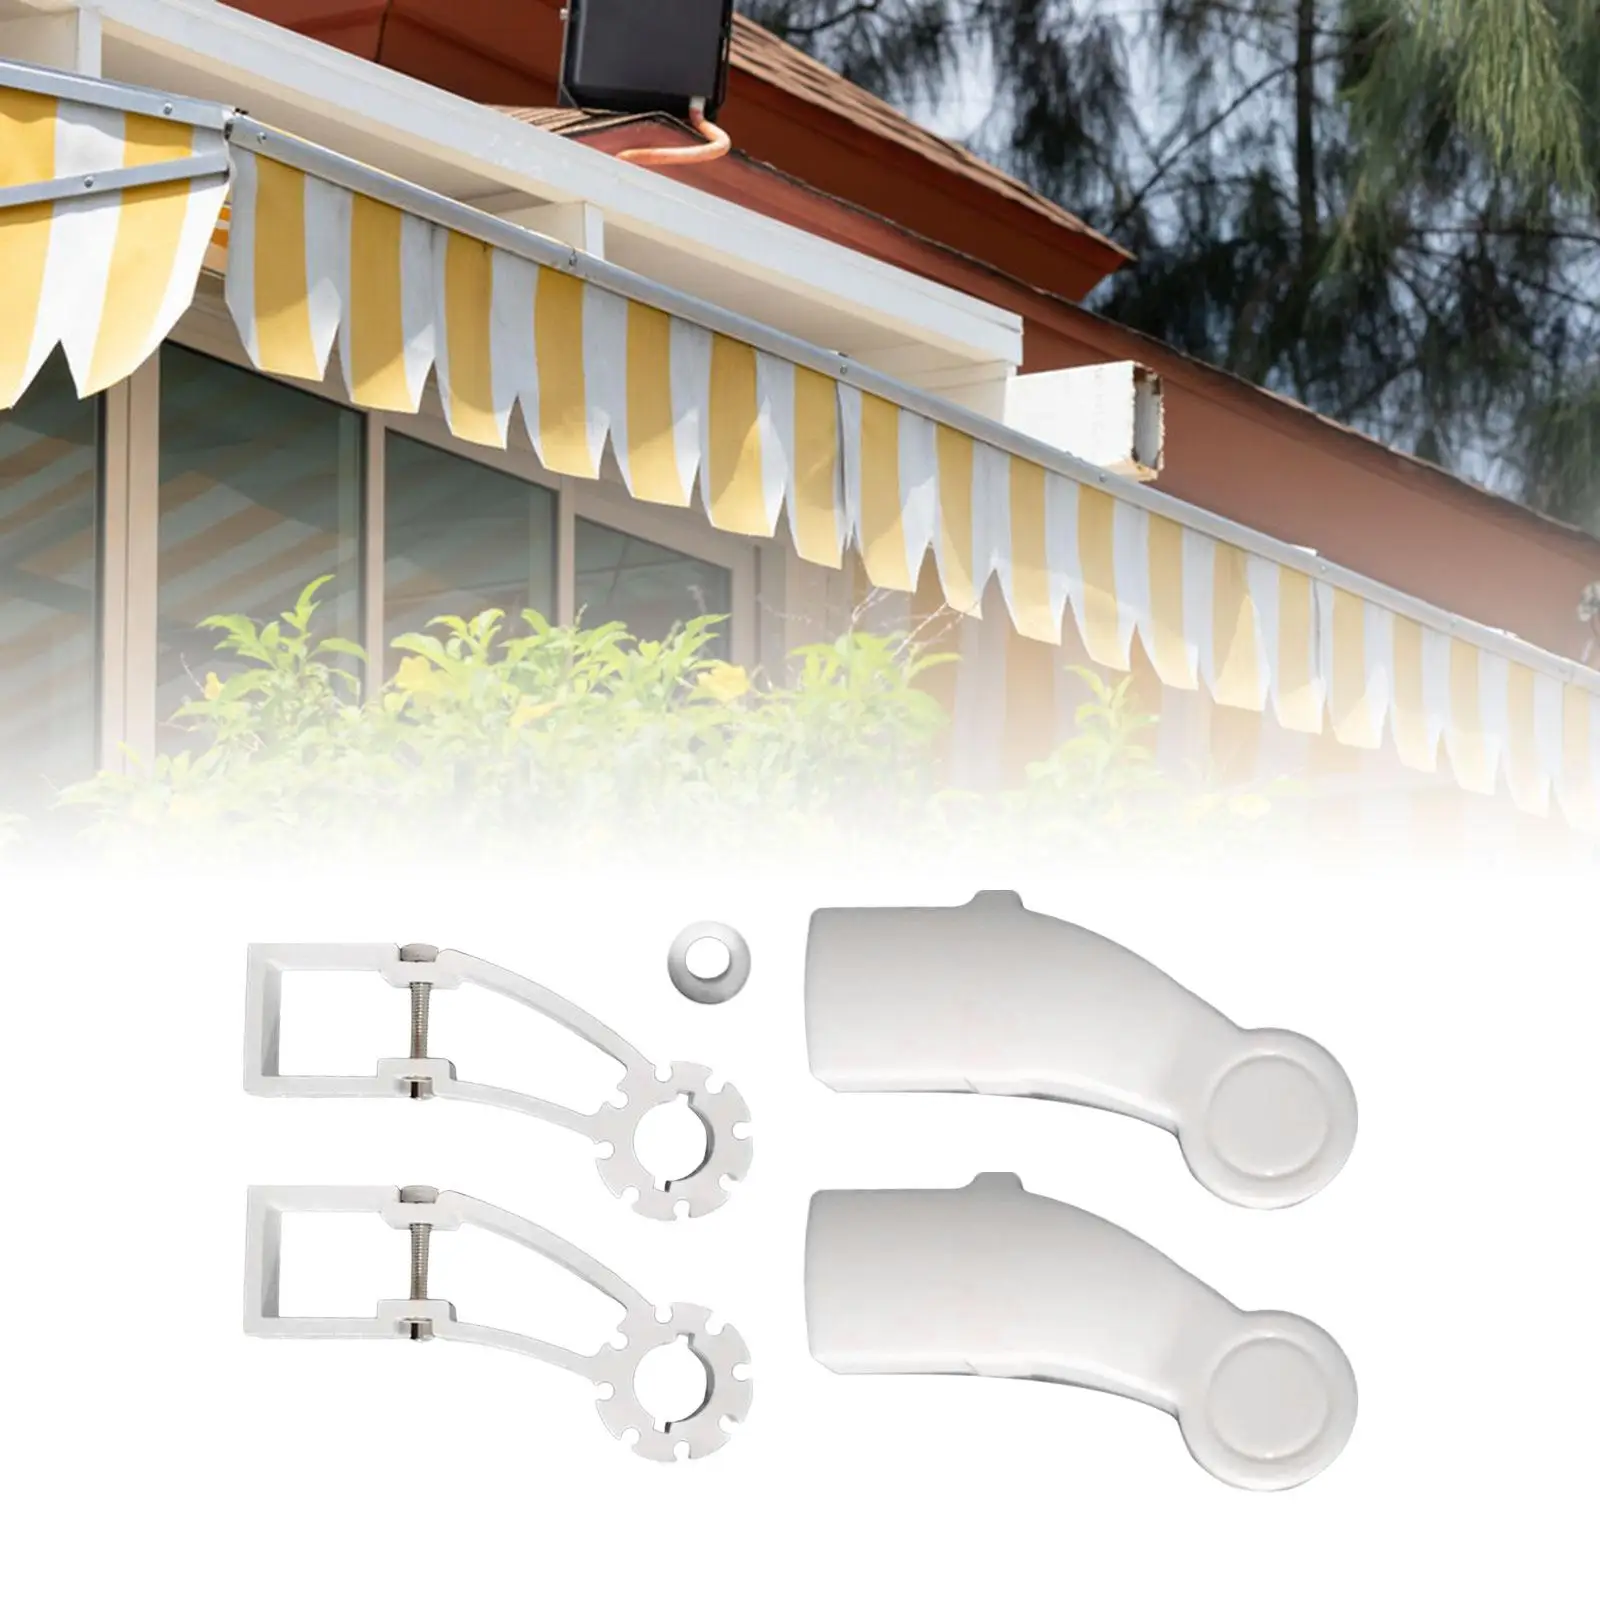 Awning Brackets suits 40mm Square Tube Assembly Retractable Awning Gearbox Support Brackets Side Brackets for Trailer RV Camper